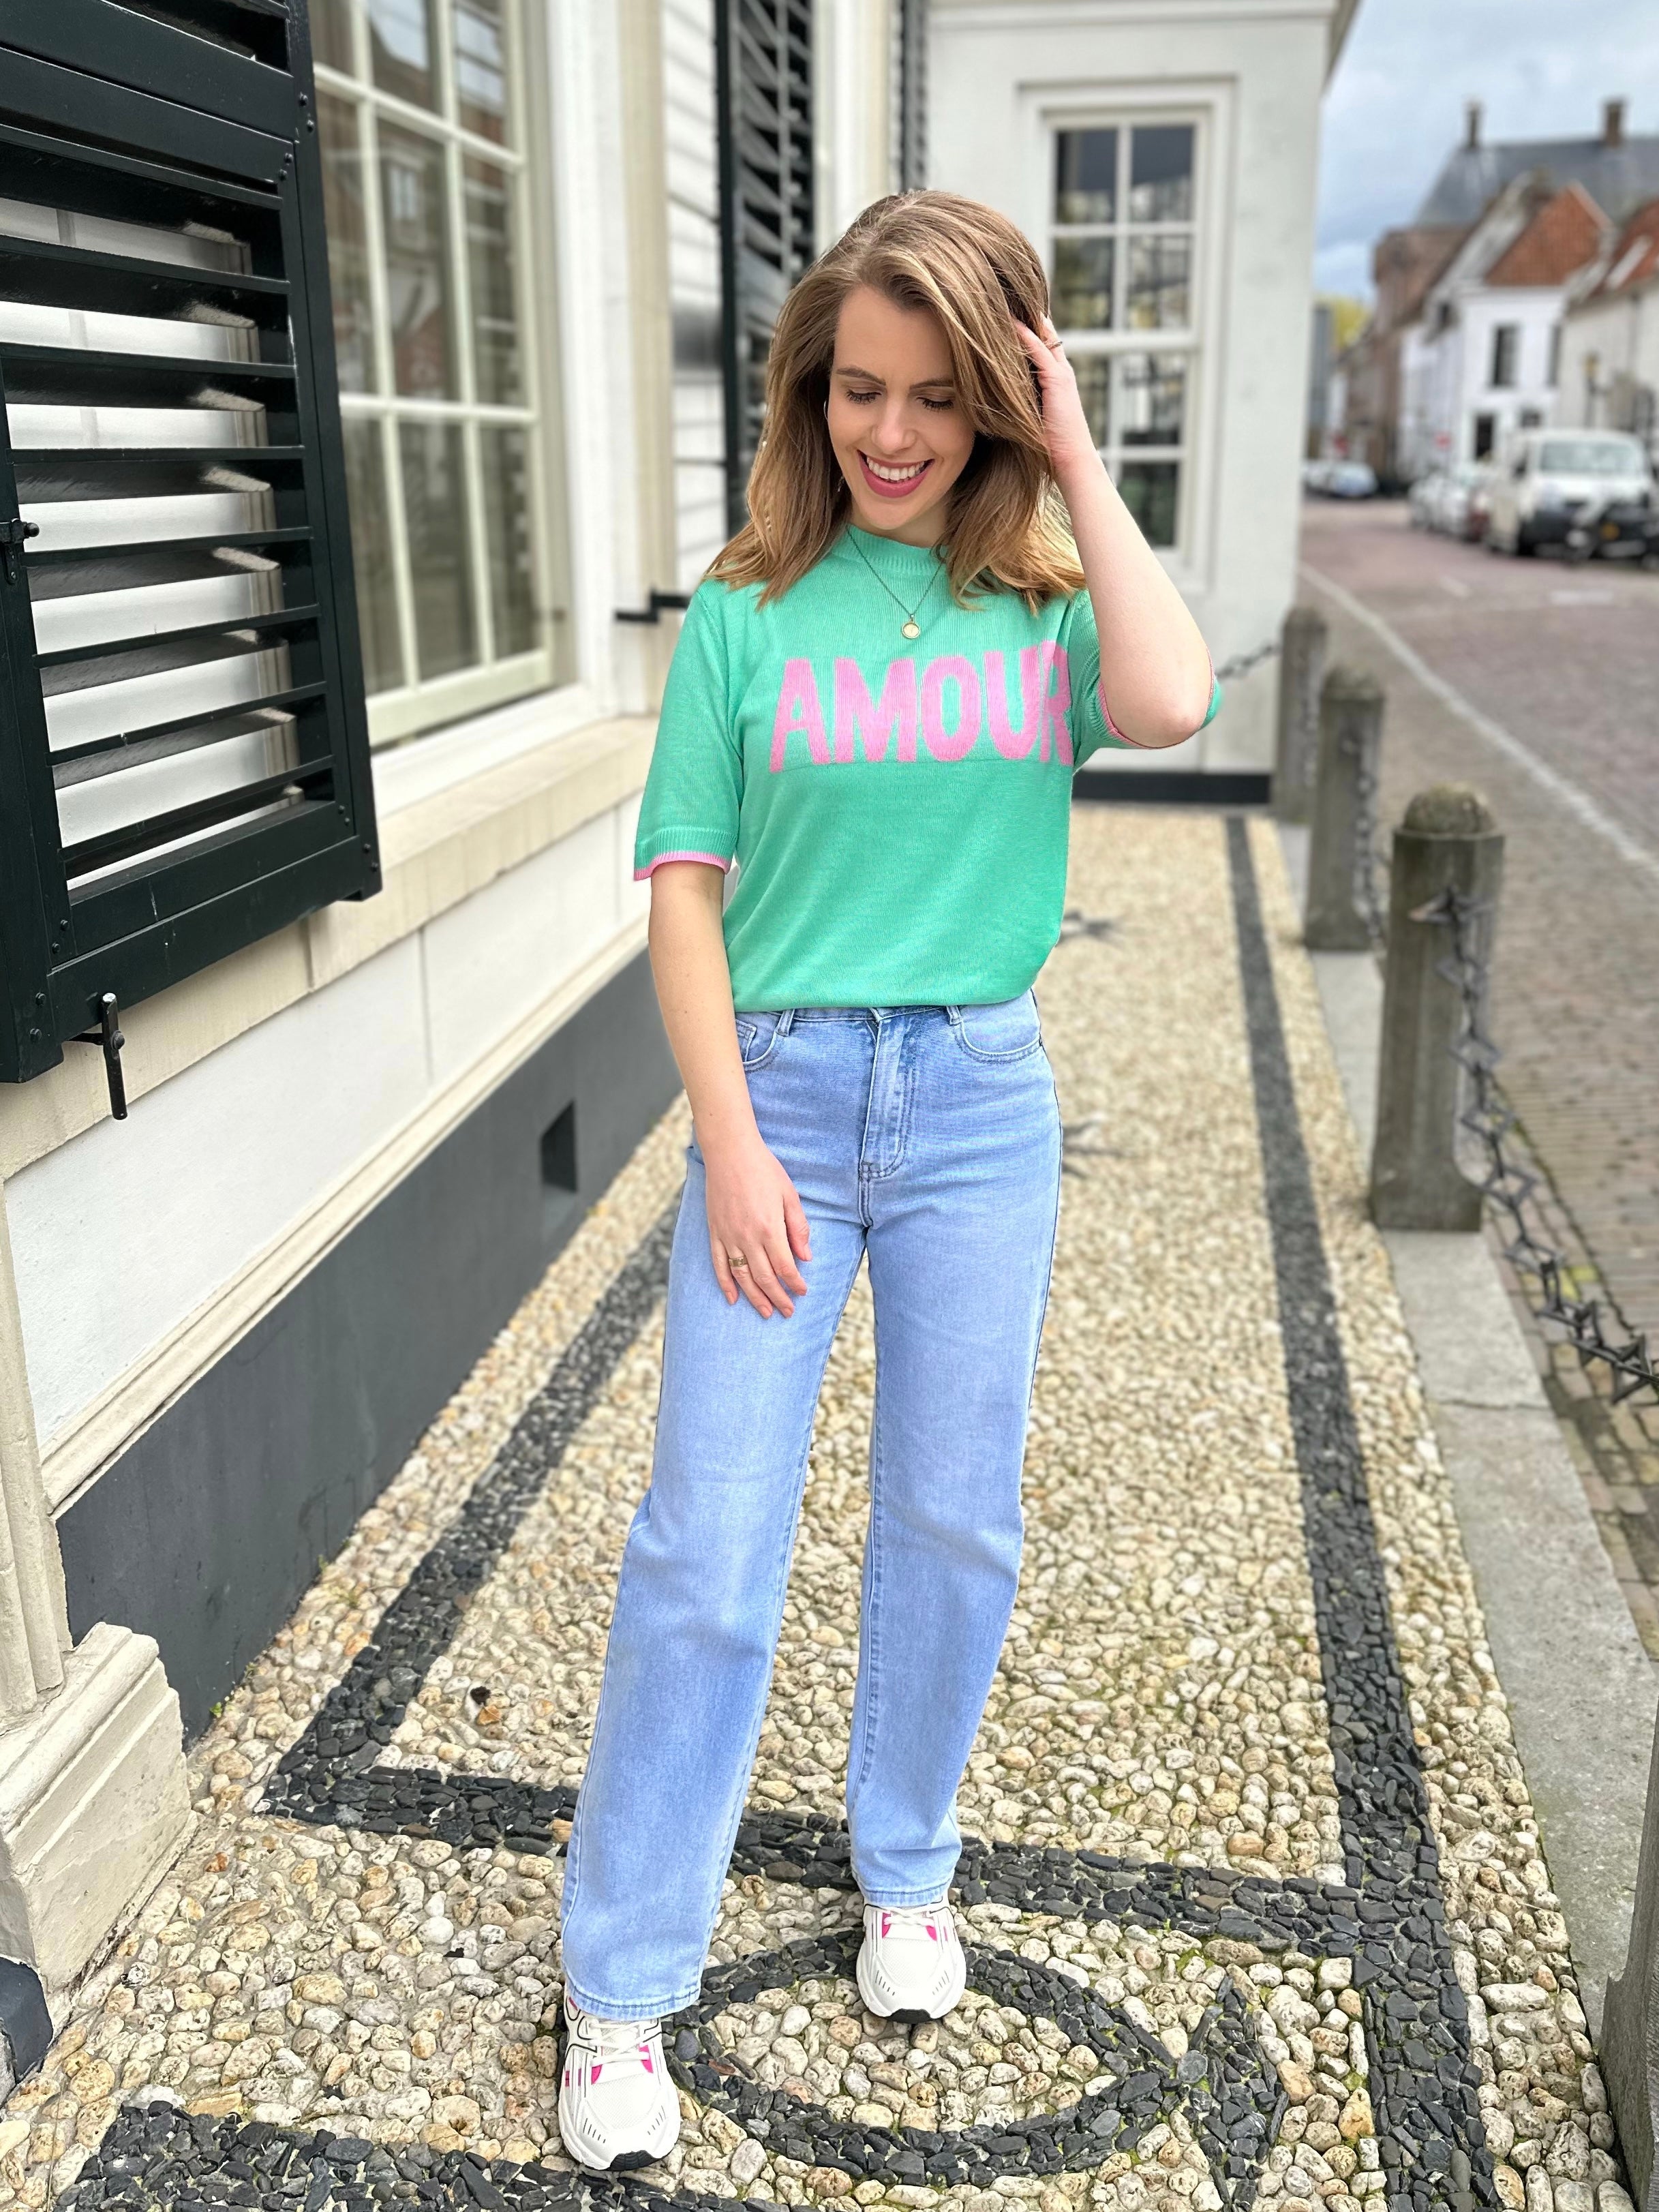 AMOUR TOP MINT/PINK